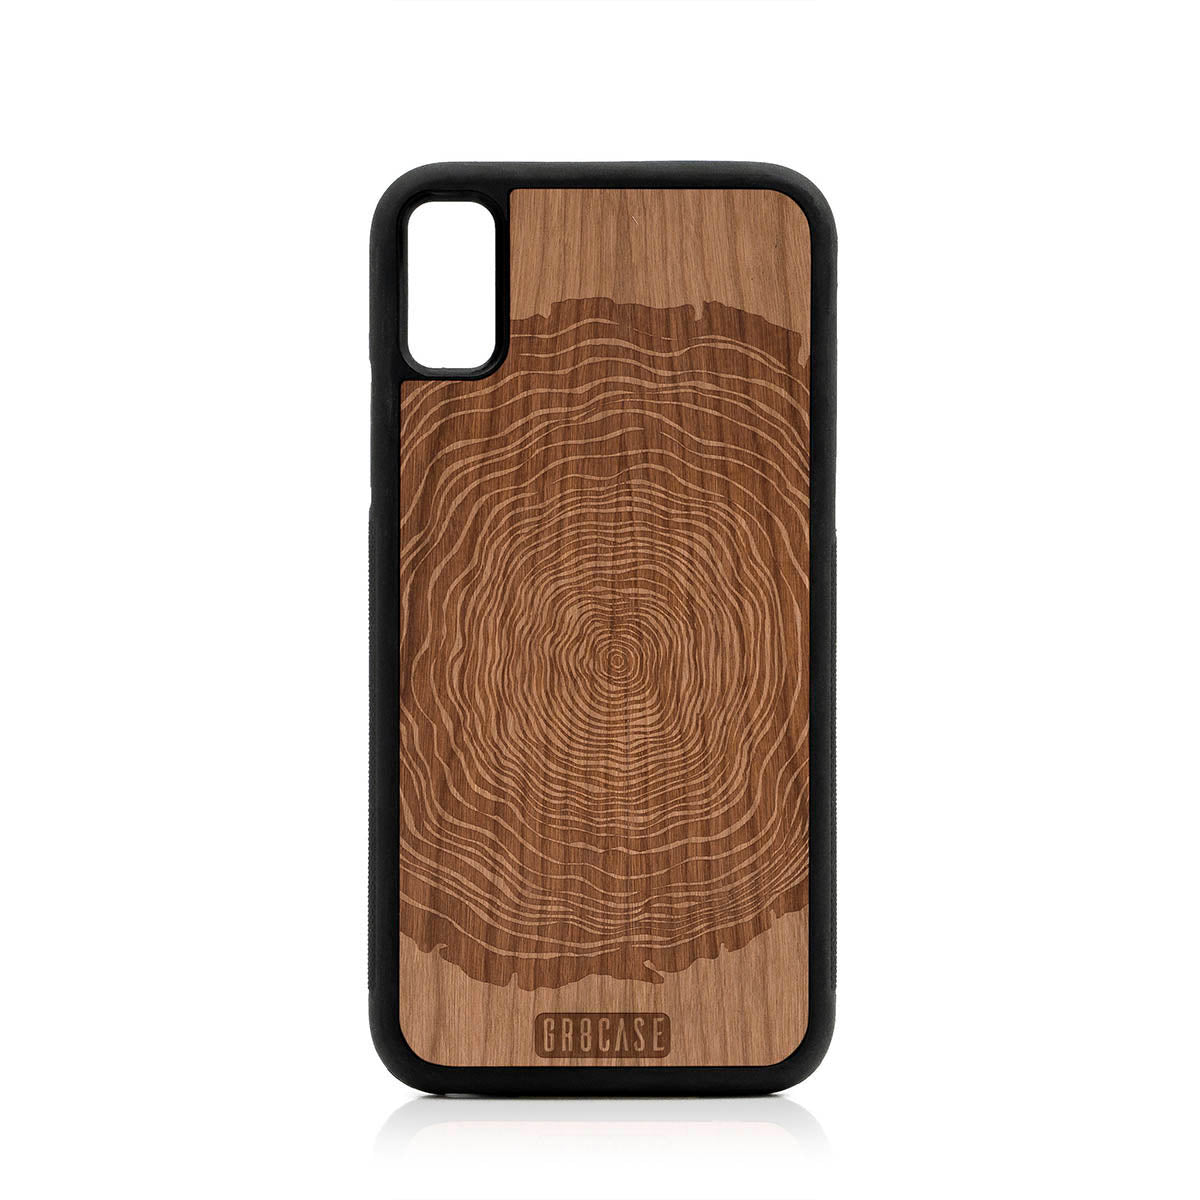 Tree Rings Design Wood Case For iPhone XS Max